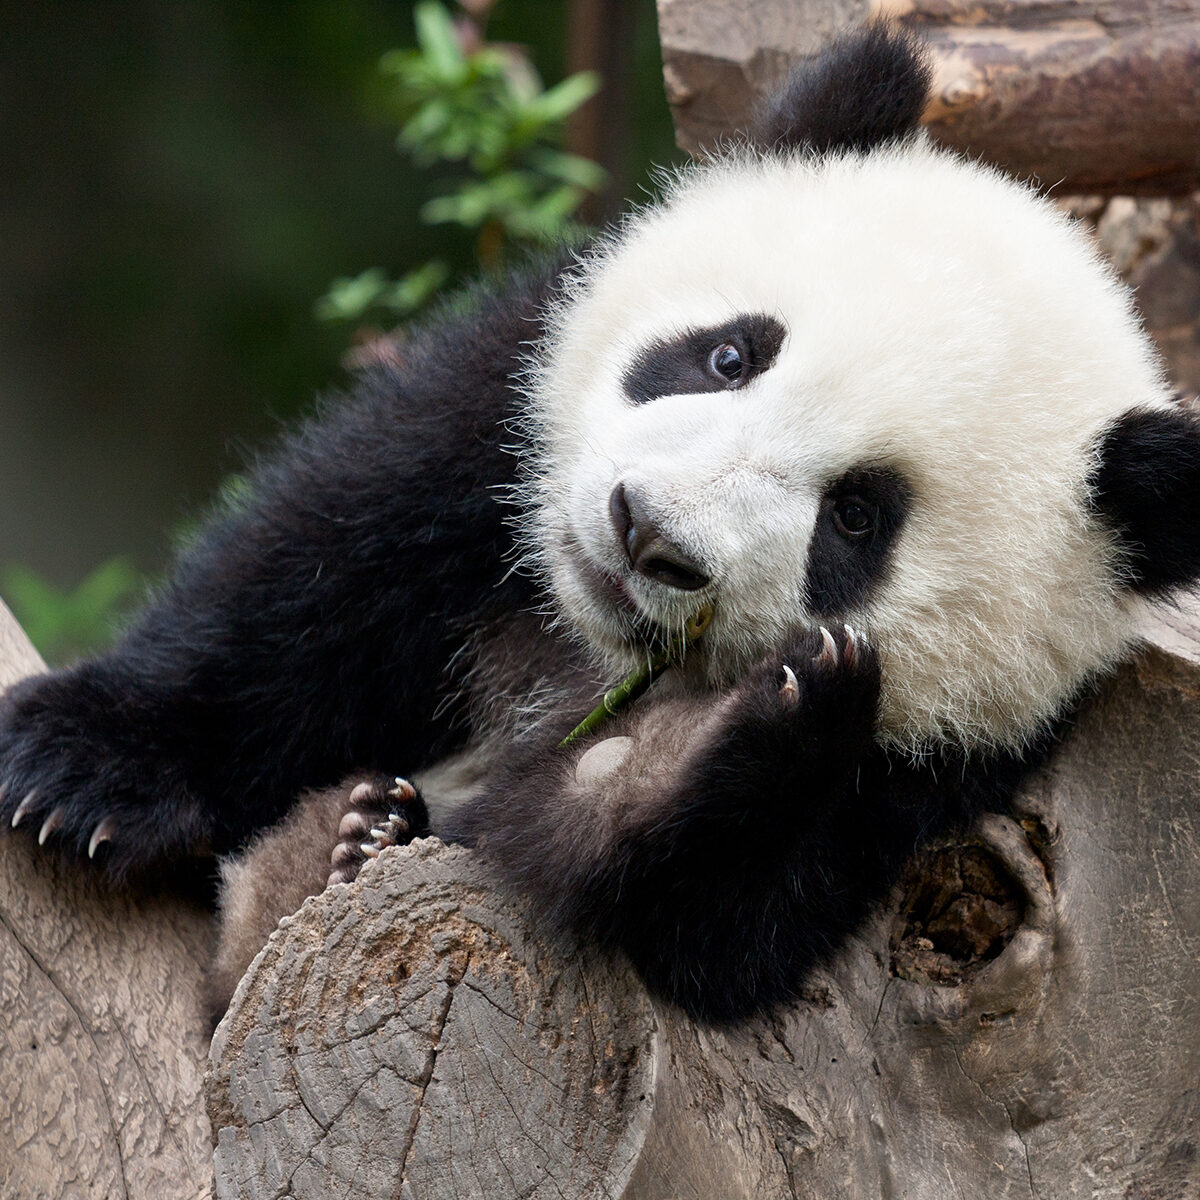 A young giant panda bear sitting in a tree curiously looks at the camera while holding a bamboo stick.